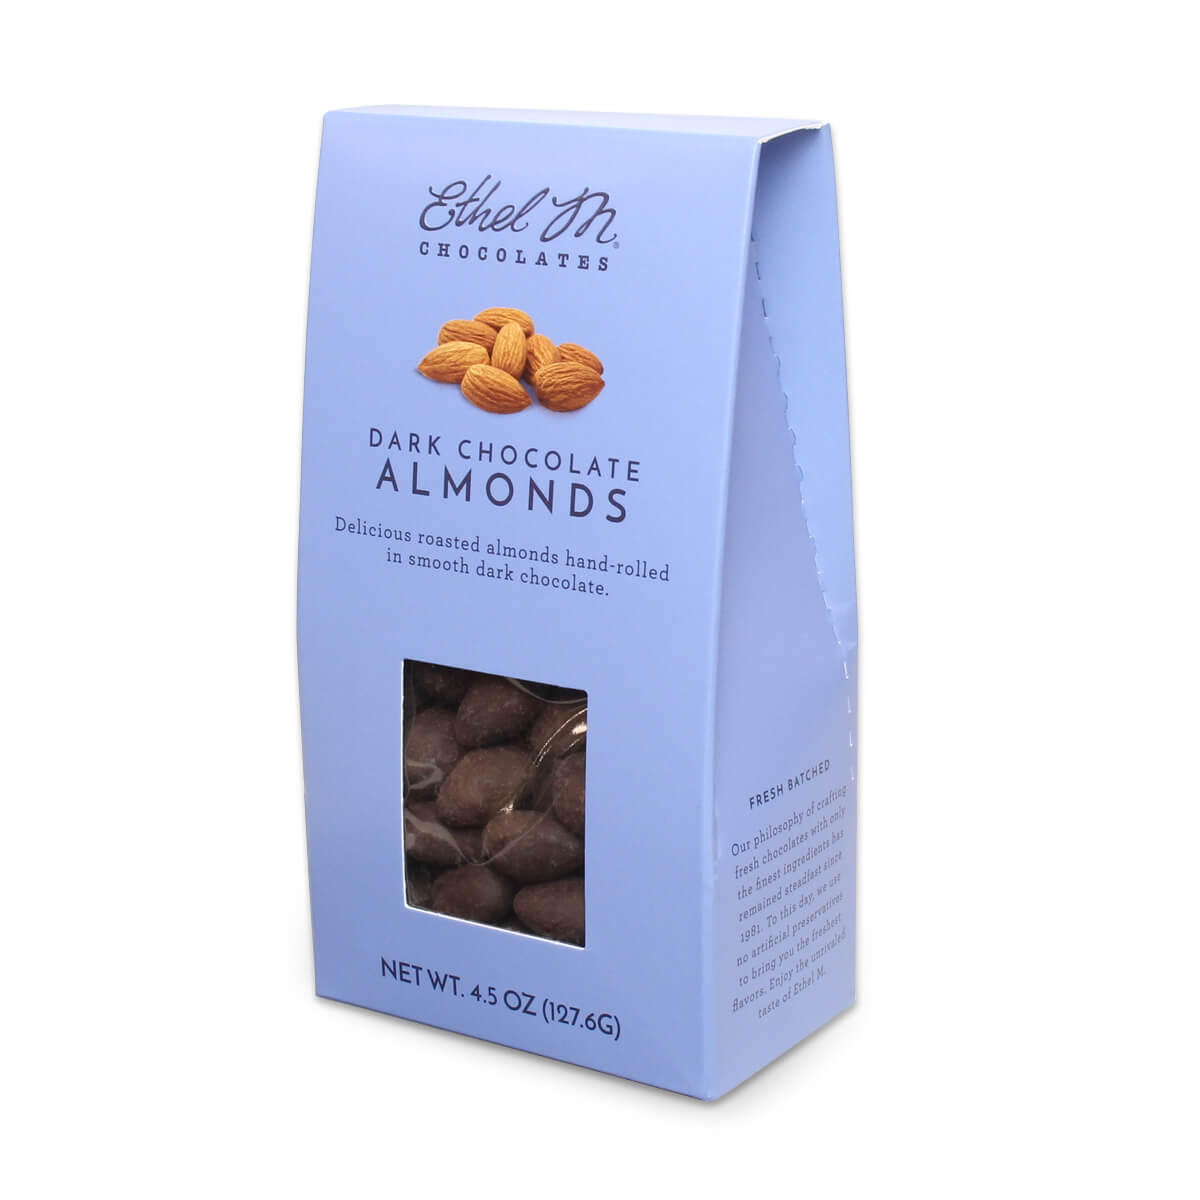 Indulge on our very own Ethel M Chocolates delicious Roasted Almonds hand-rolled in Smooth Premium Dark Chocolate.